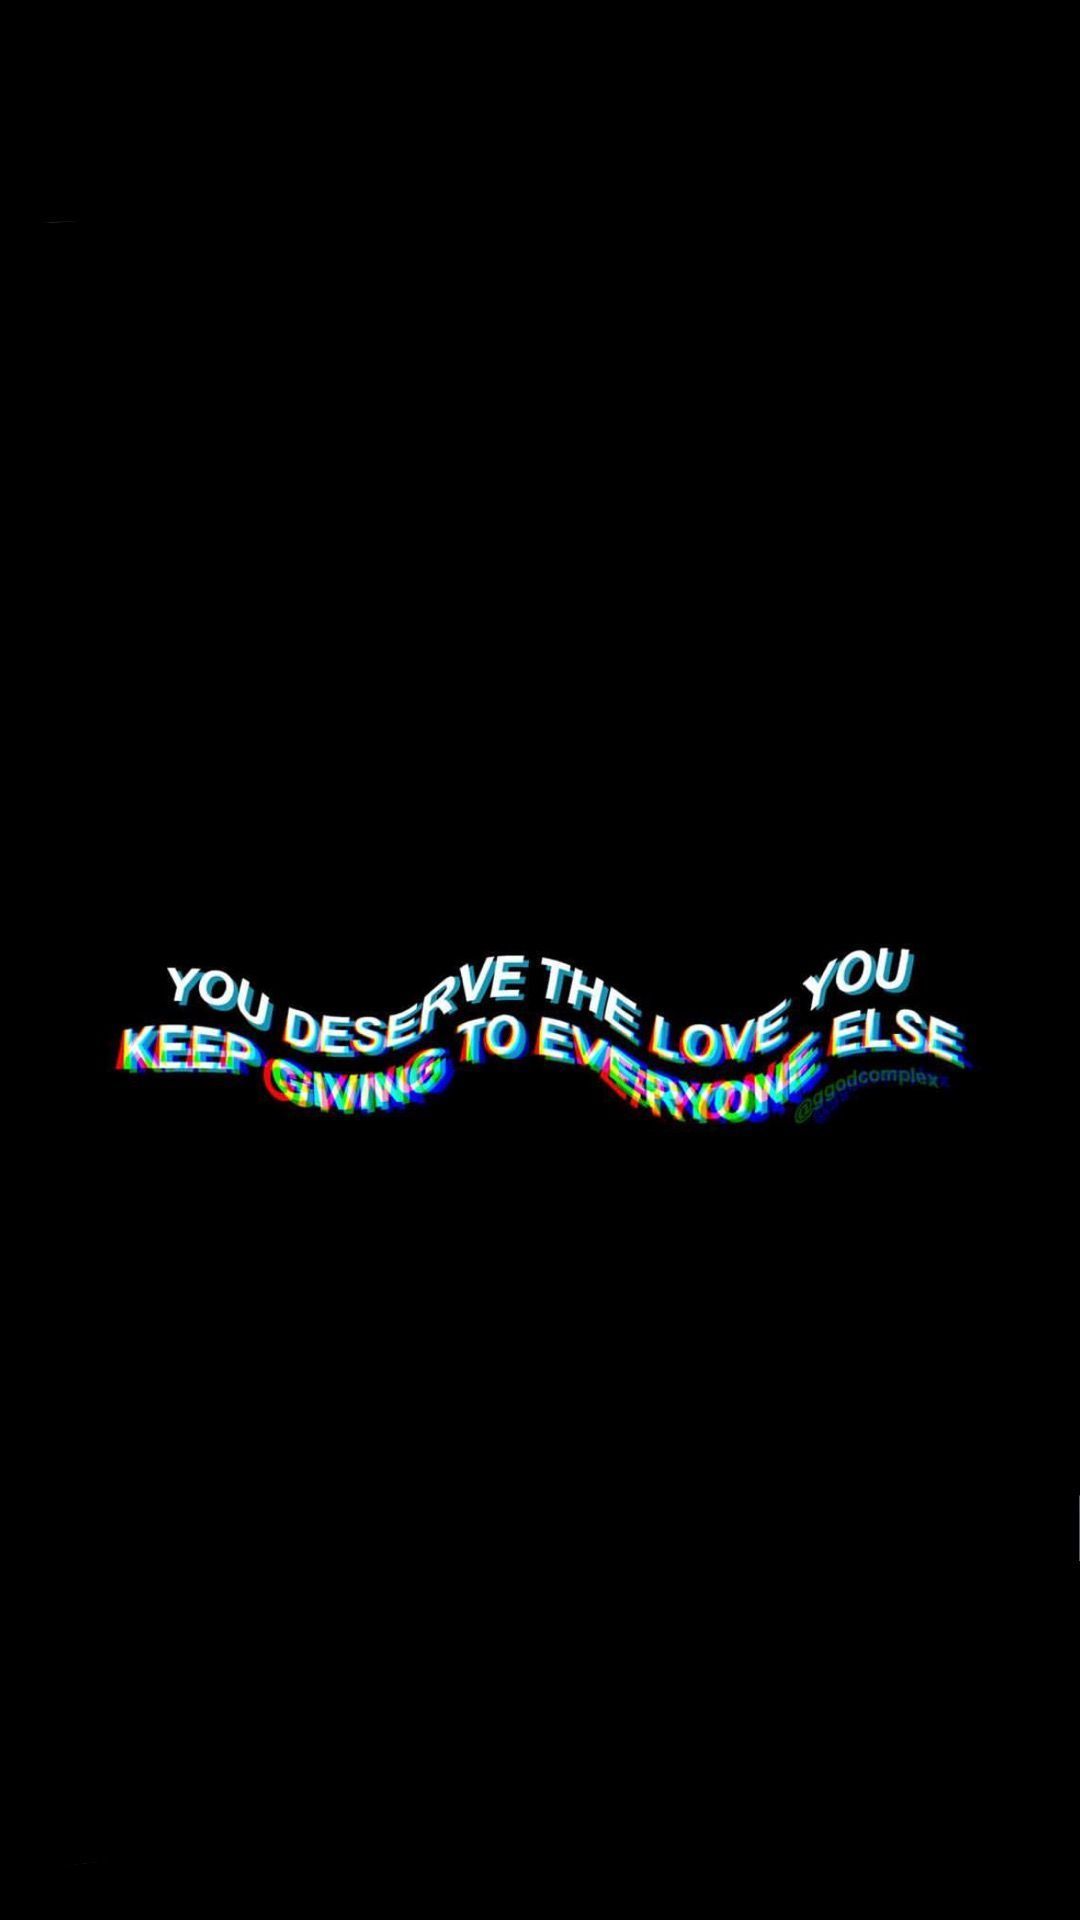 A black background with the words 